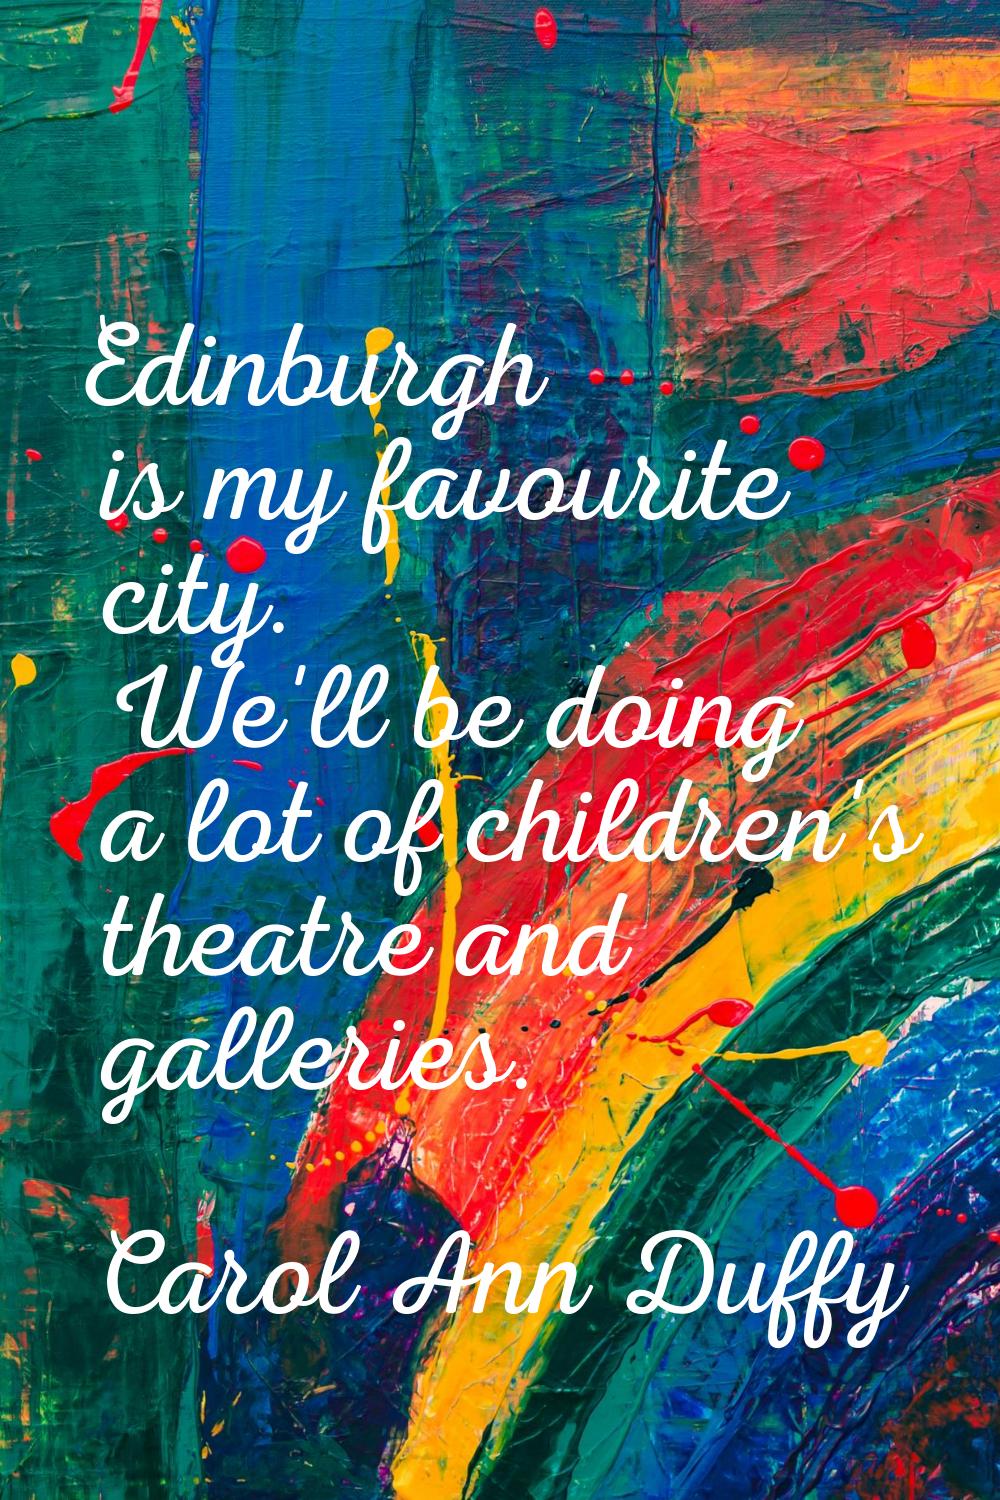 Edinburgh is my favourite city. We'll be doing a lot of children's theatre and galleries.